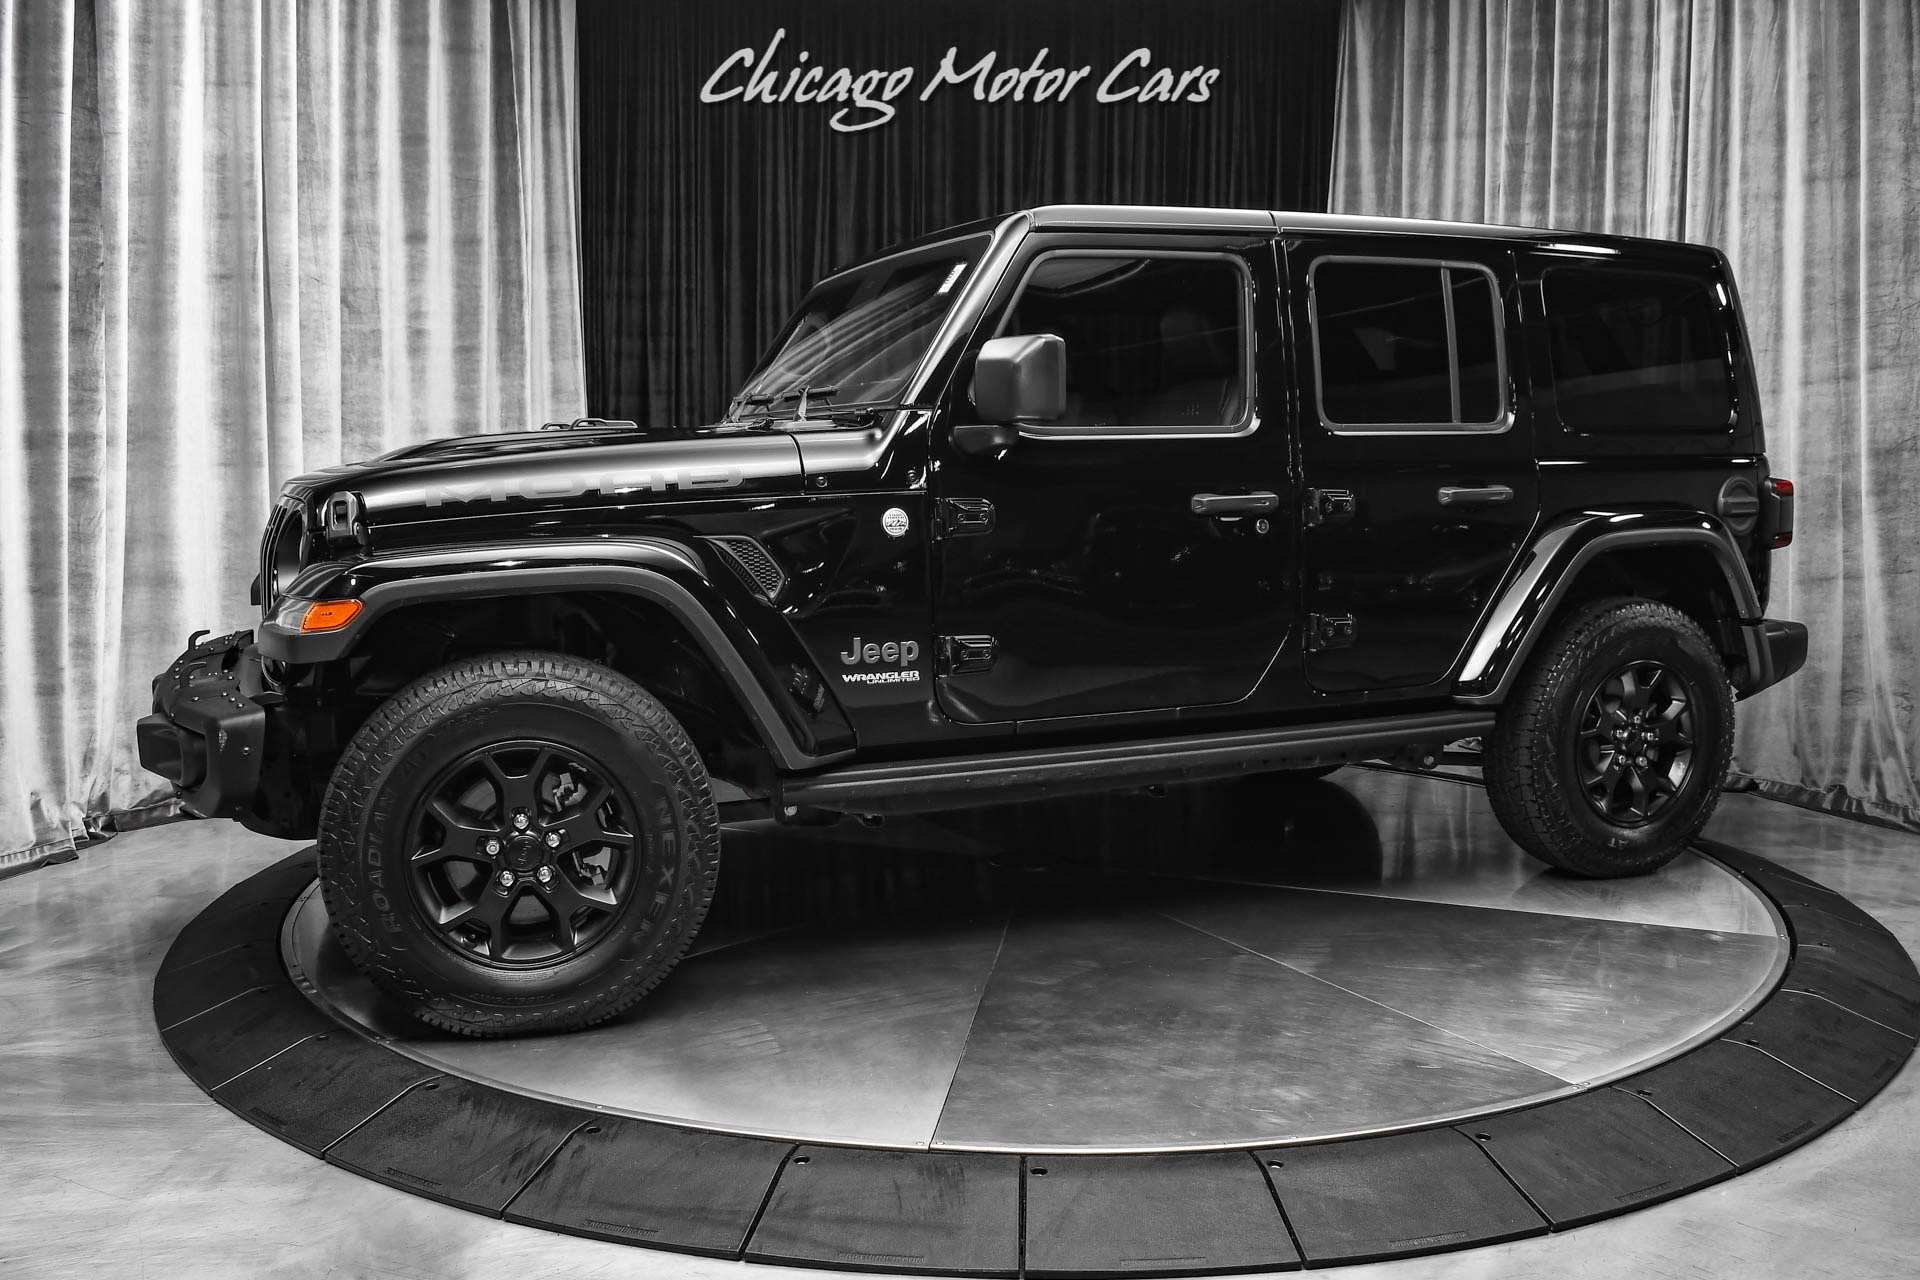 Used-2019-Jeep-Wrangler-Unlimited-Moab-4X4-Rare-Moab-Edition-Adaptive-Cruise-Control-Cold-Weather-Group